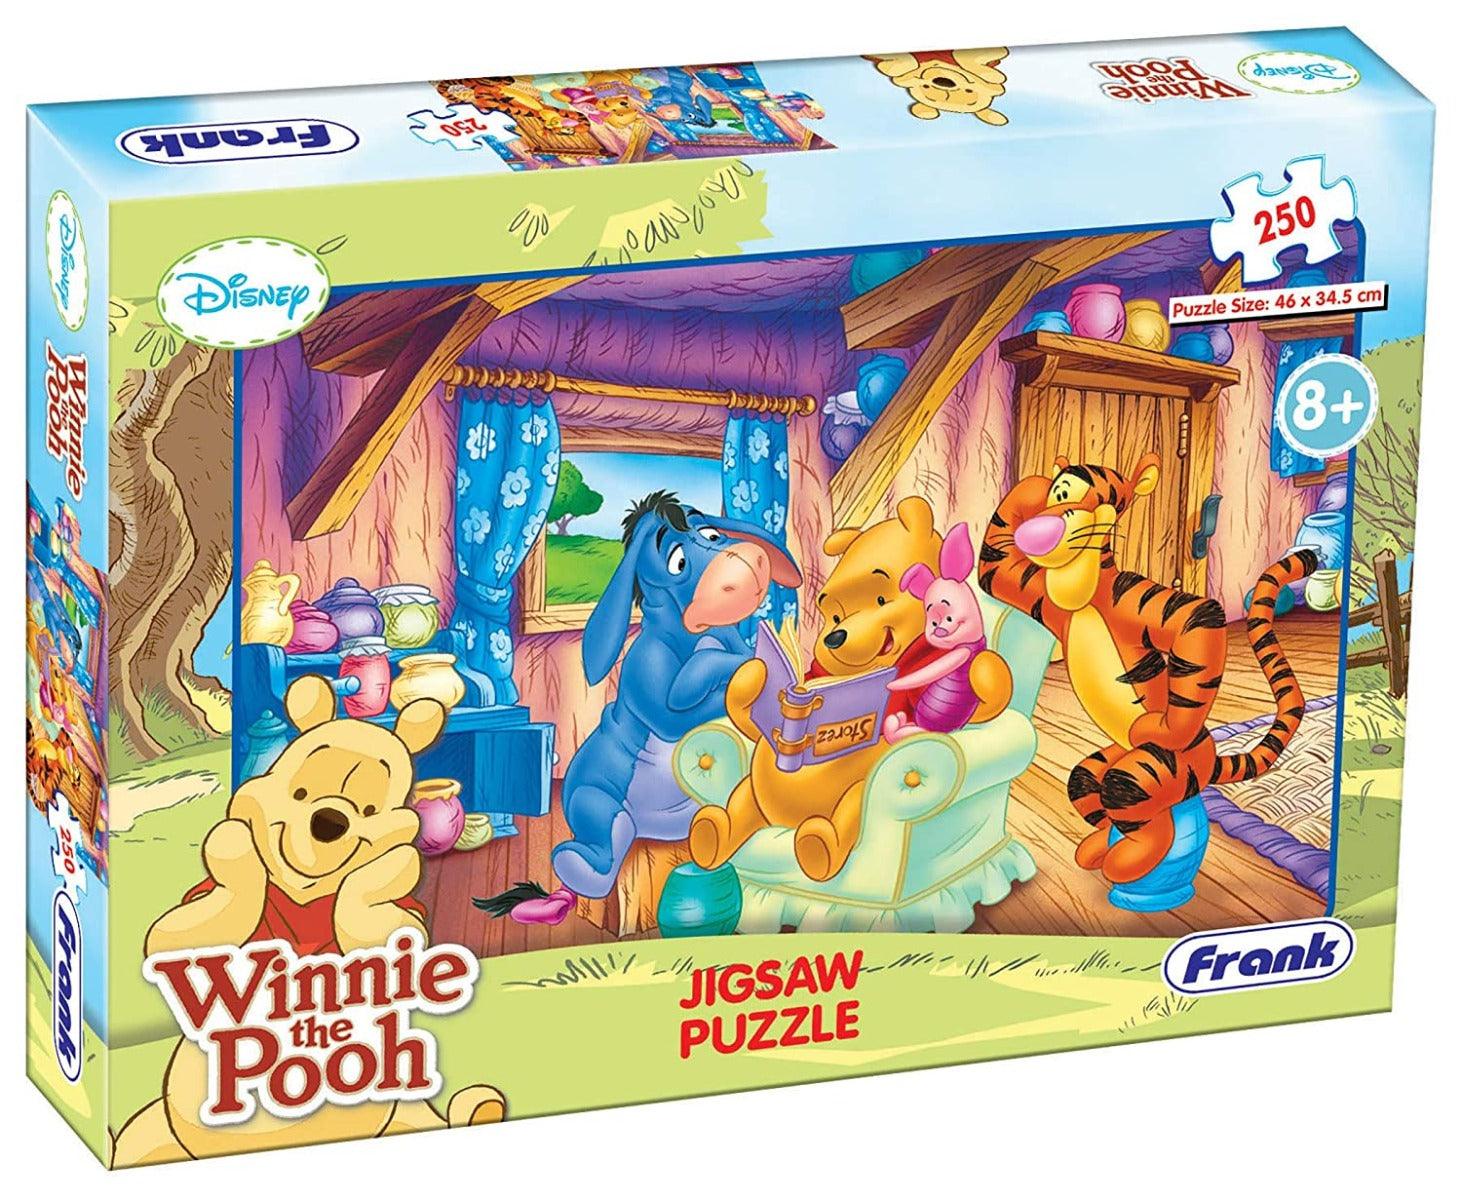 Frank Disney Winnie The Pooh 250 Pieces Jigsaw Puzzle for 8 Year Old Kids and Above